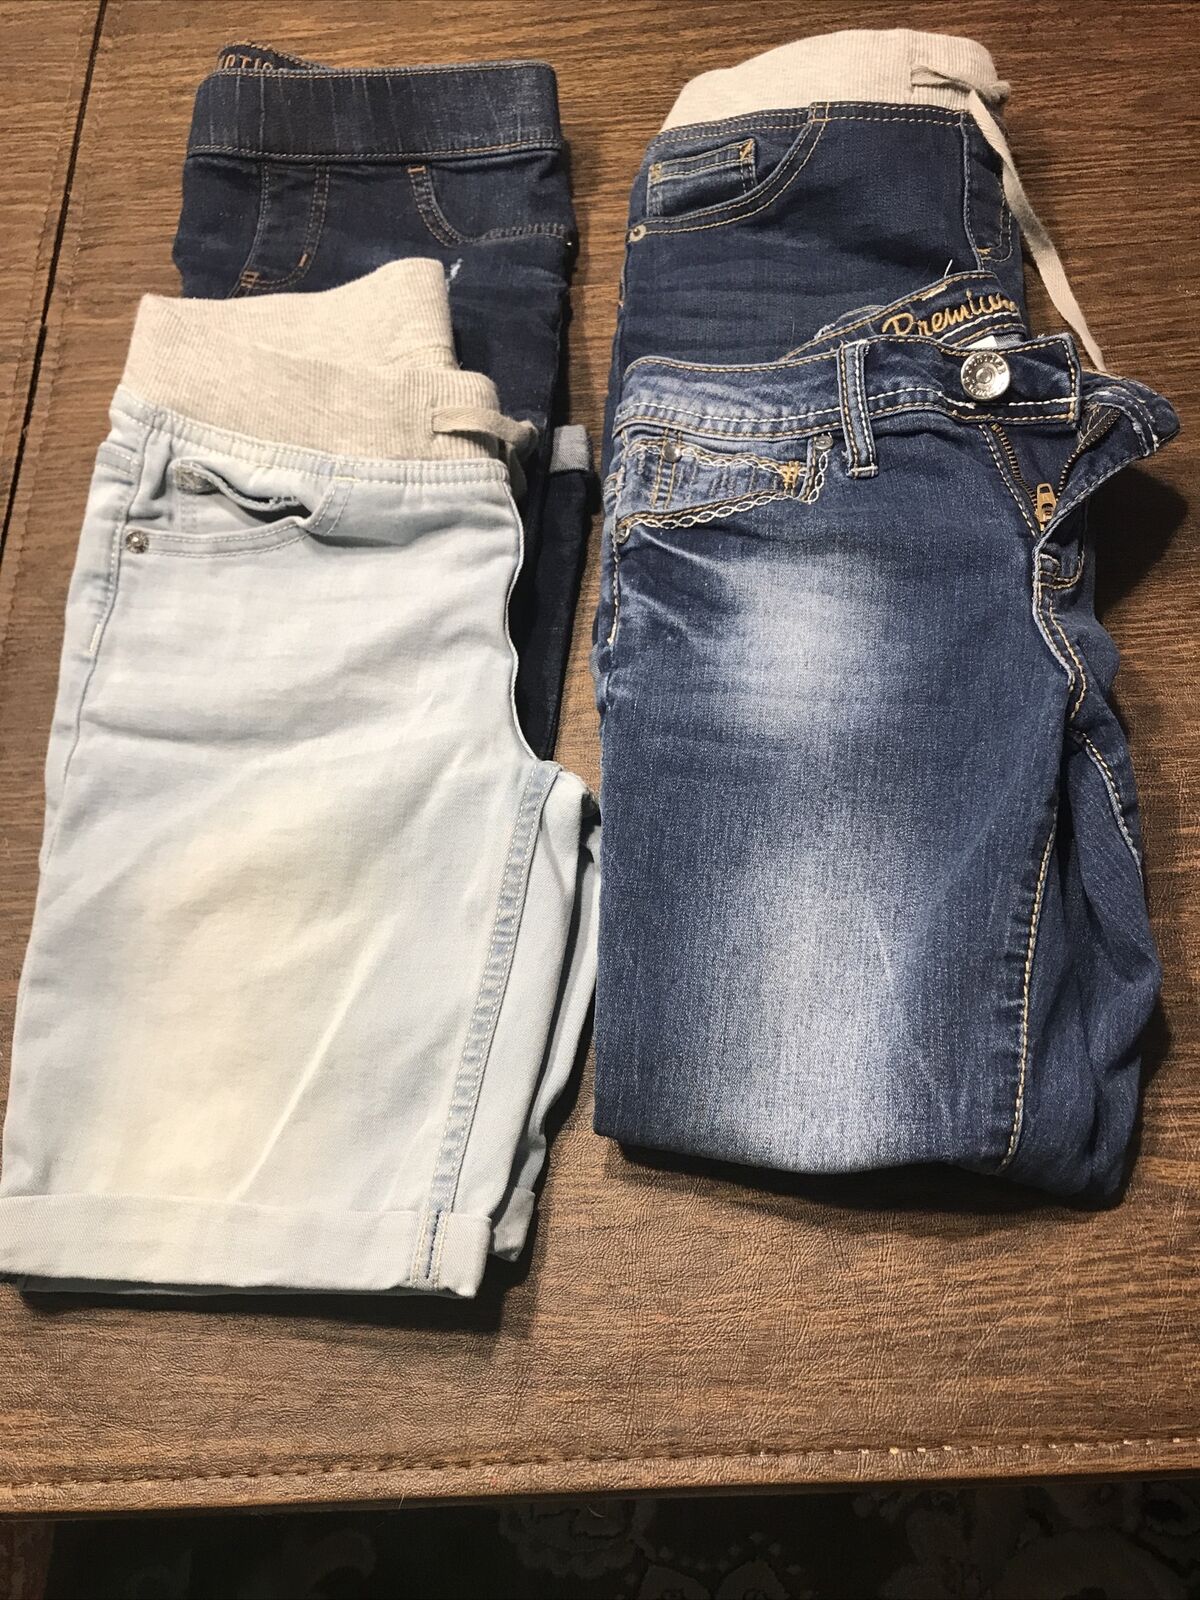 Justice Girls Size 10 Lot Of 4 Jeans And Shorts